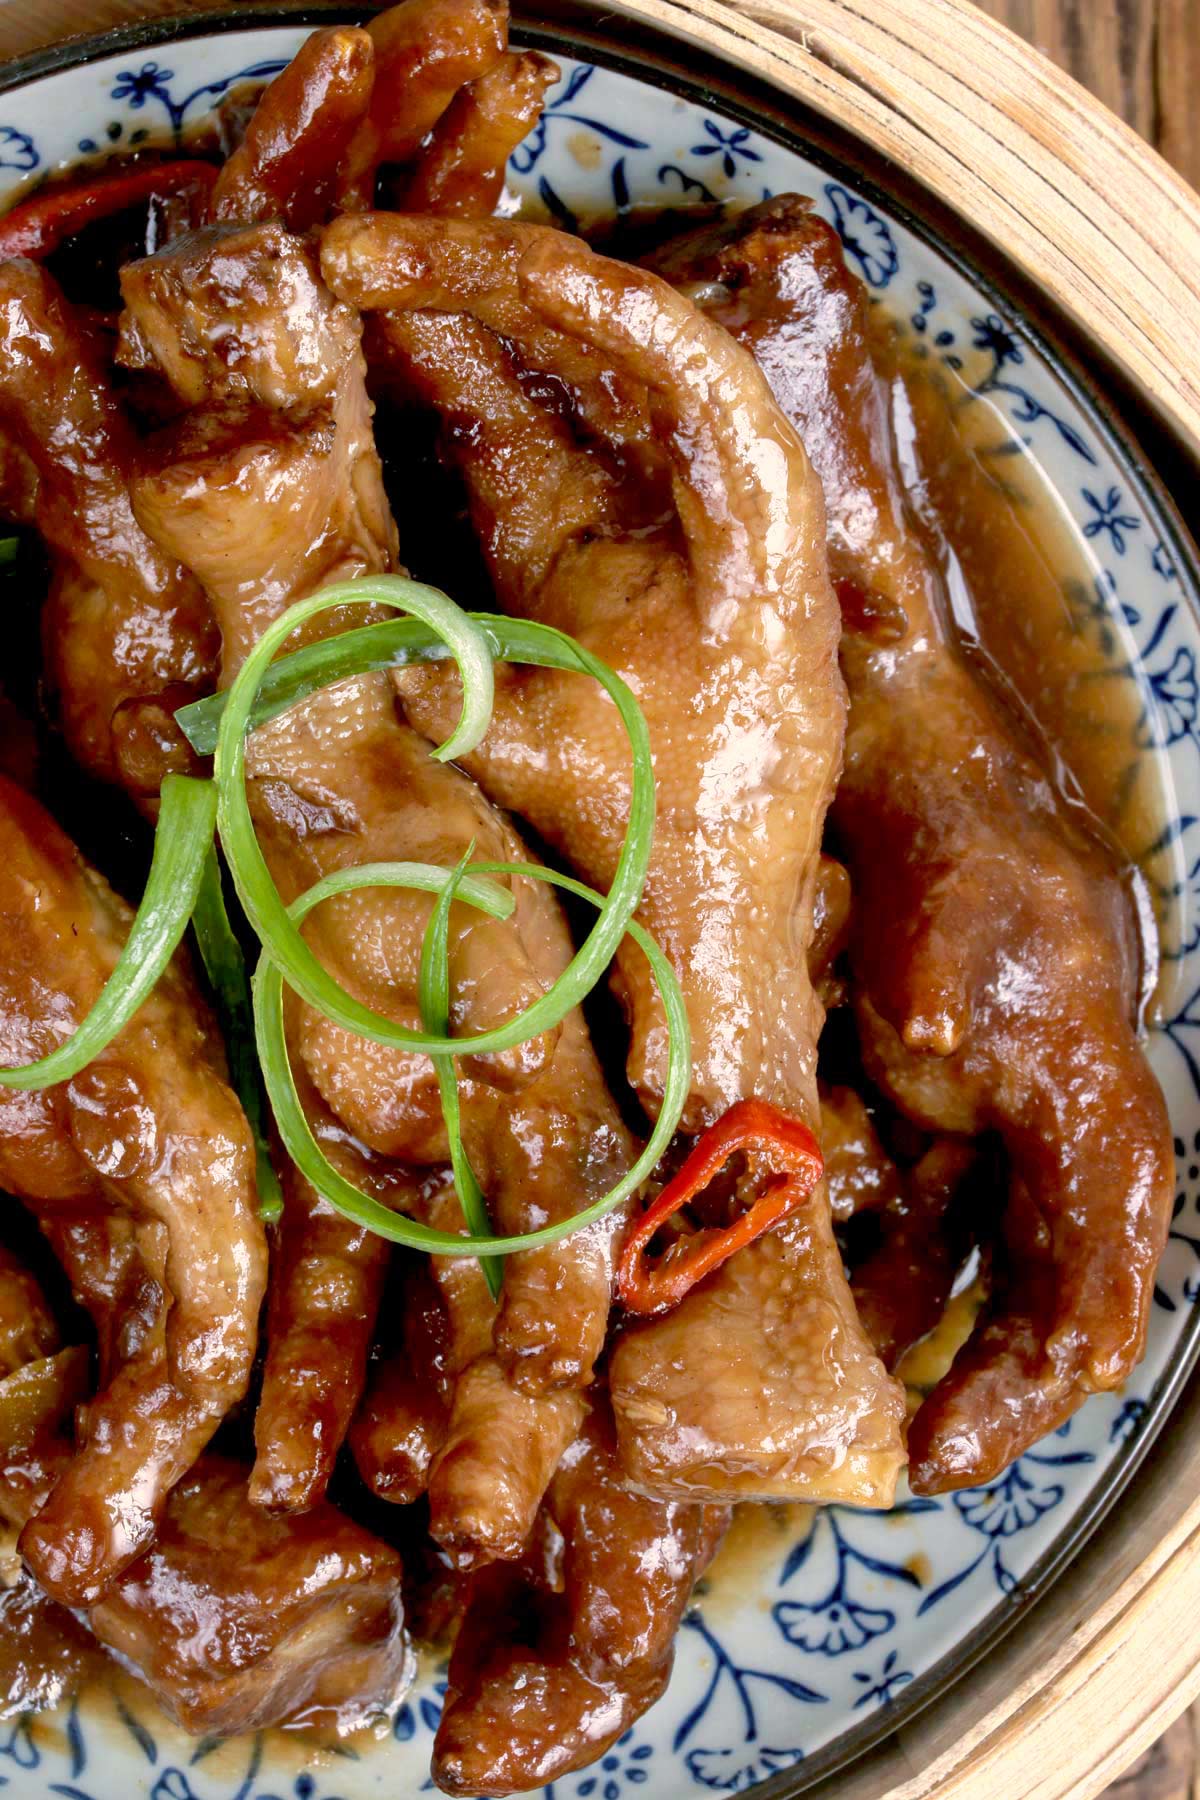 Chicken Feet Dimsum with a savory and umami sauce.